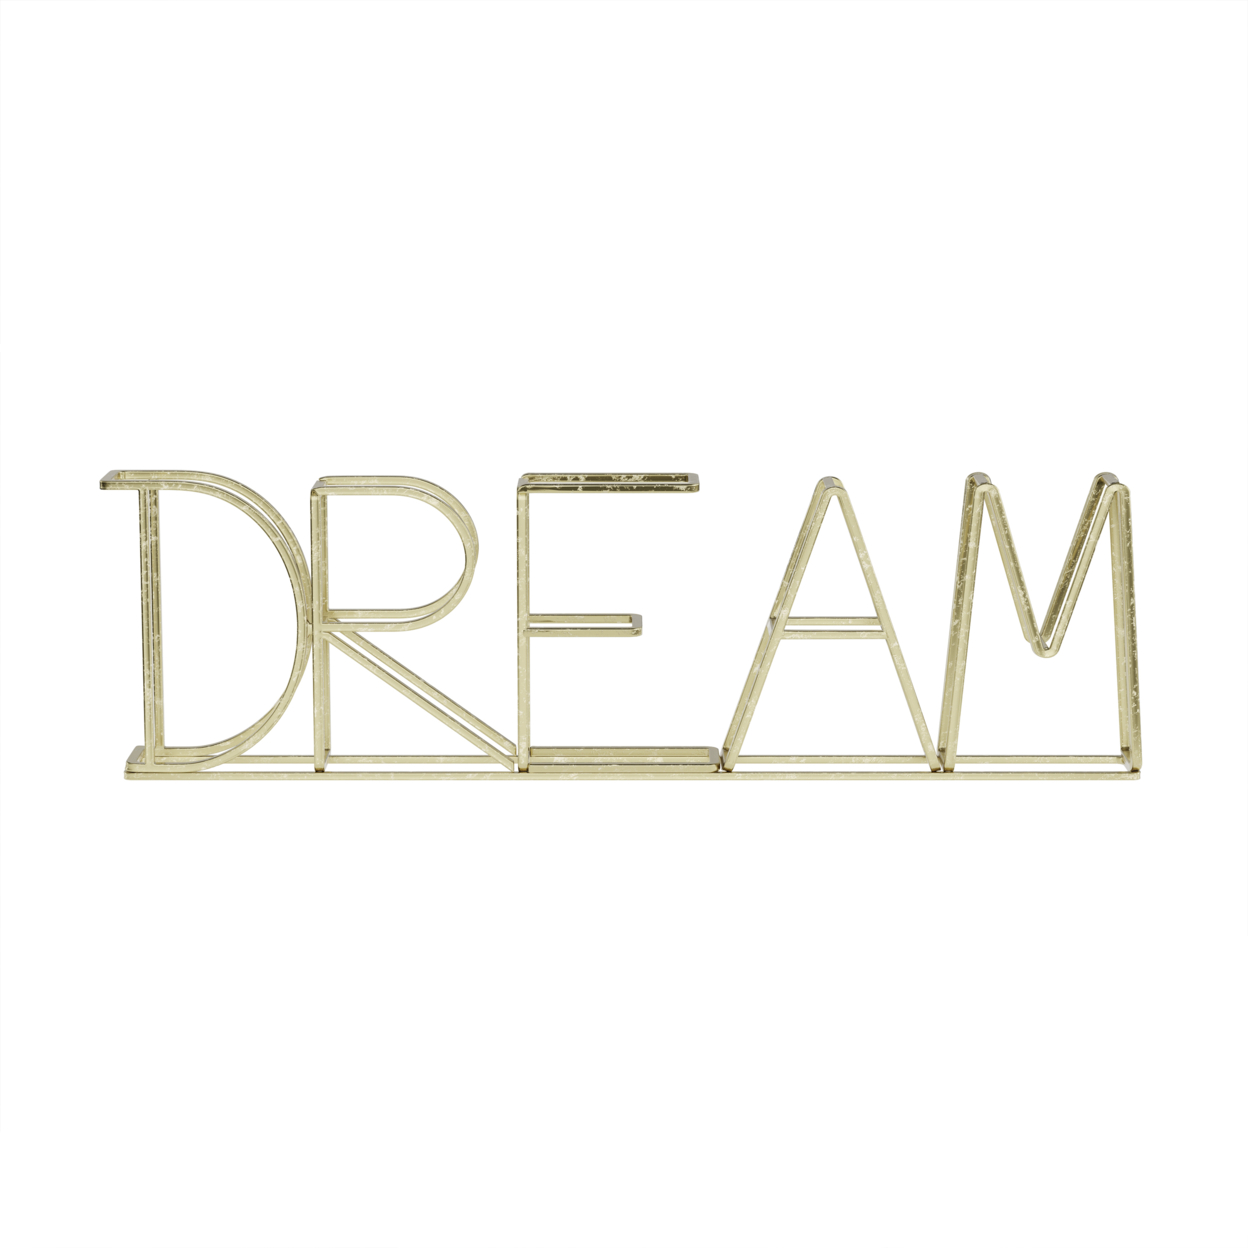 Metal Cutout Free-Standing Table Top Sign-3D DREAM Word Art Accent Dcor Gold Metallic Finish